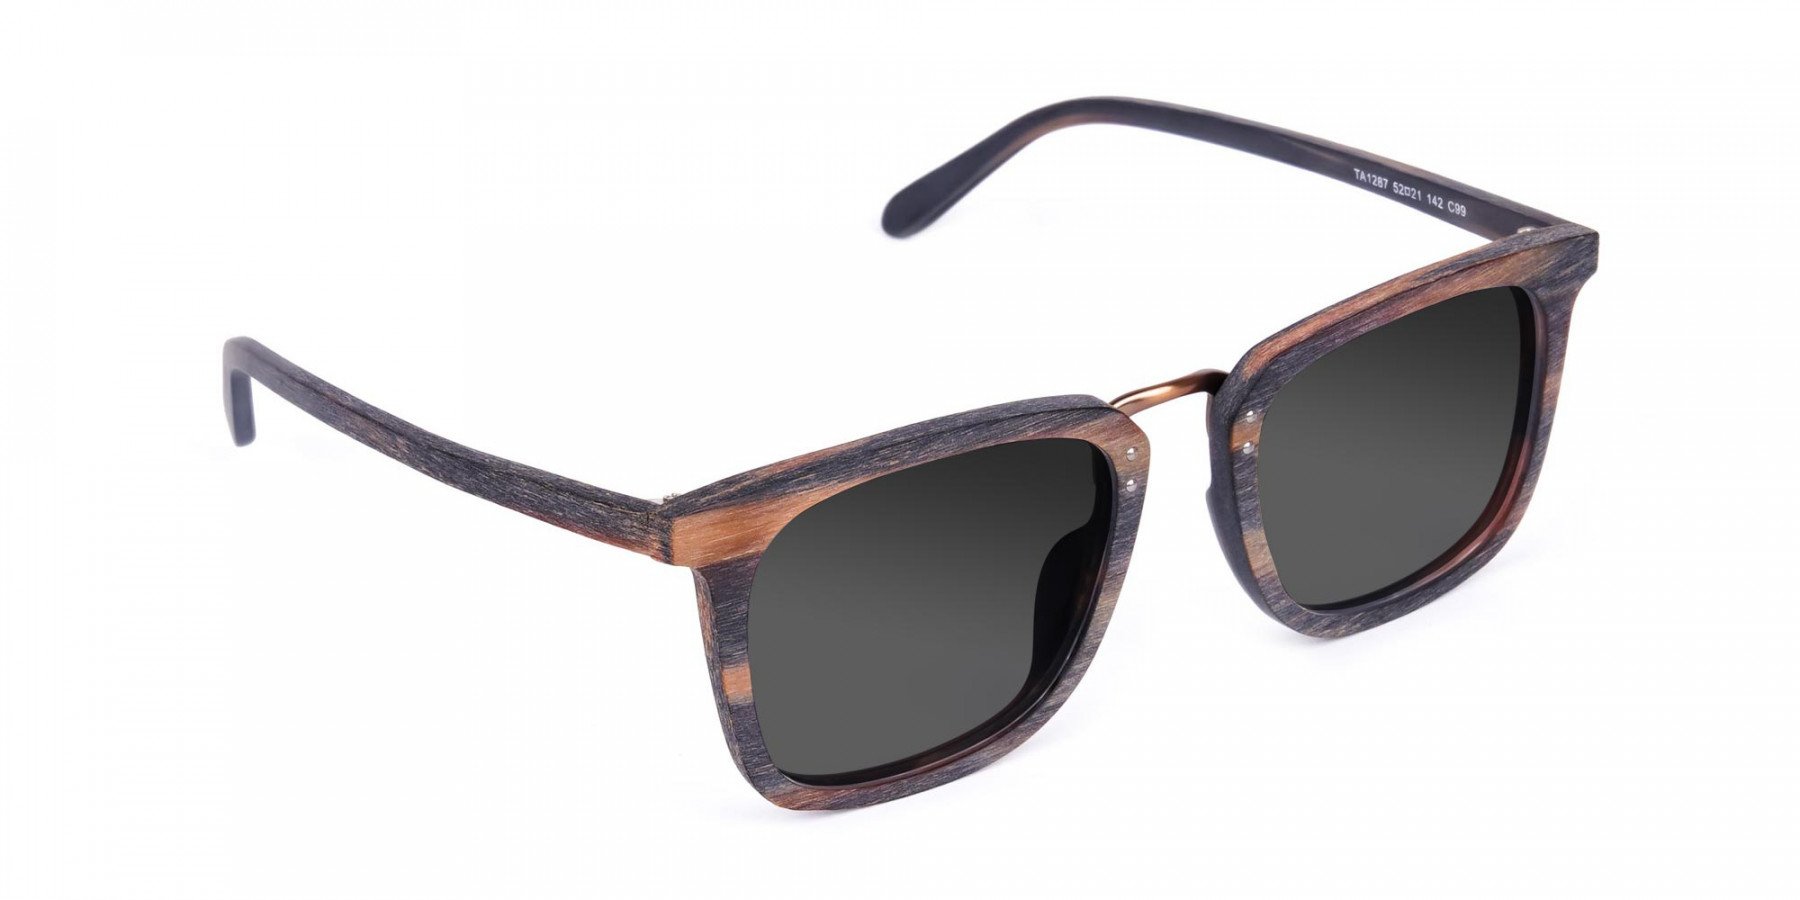 Wooden-Tortoise-Square-Sunglasses-with-Brown-Tint-1